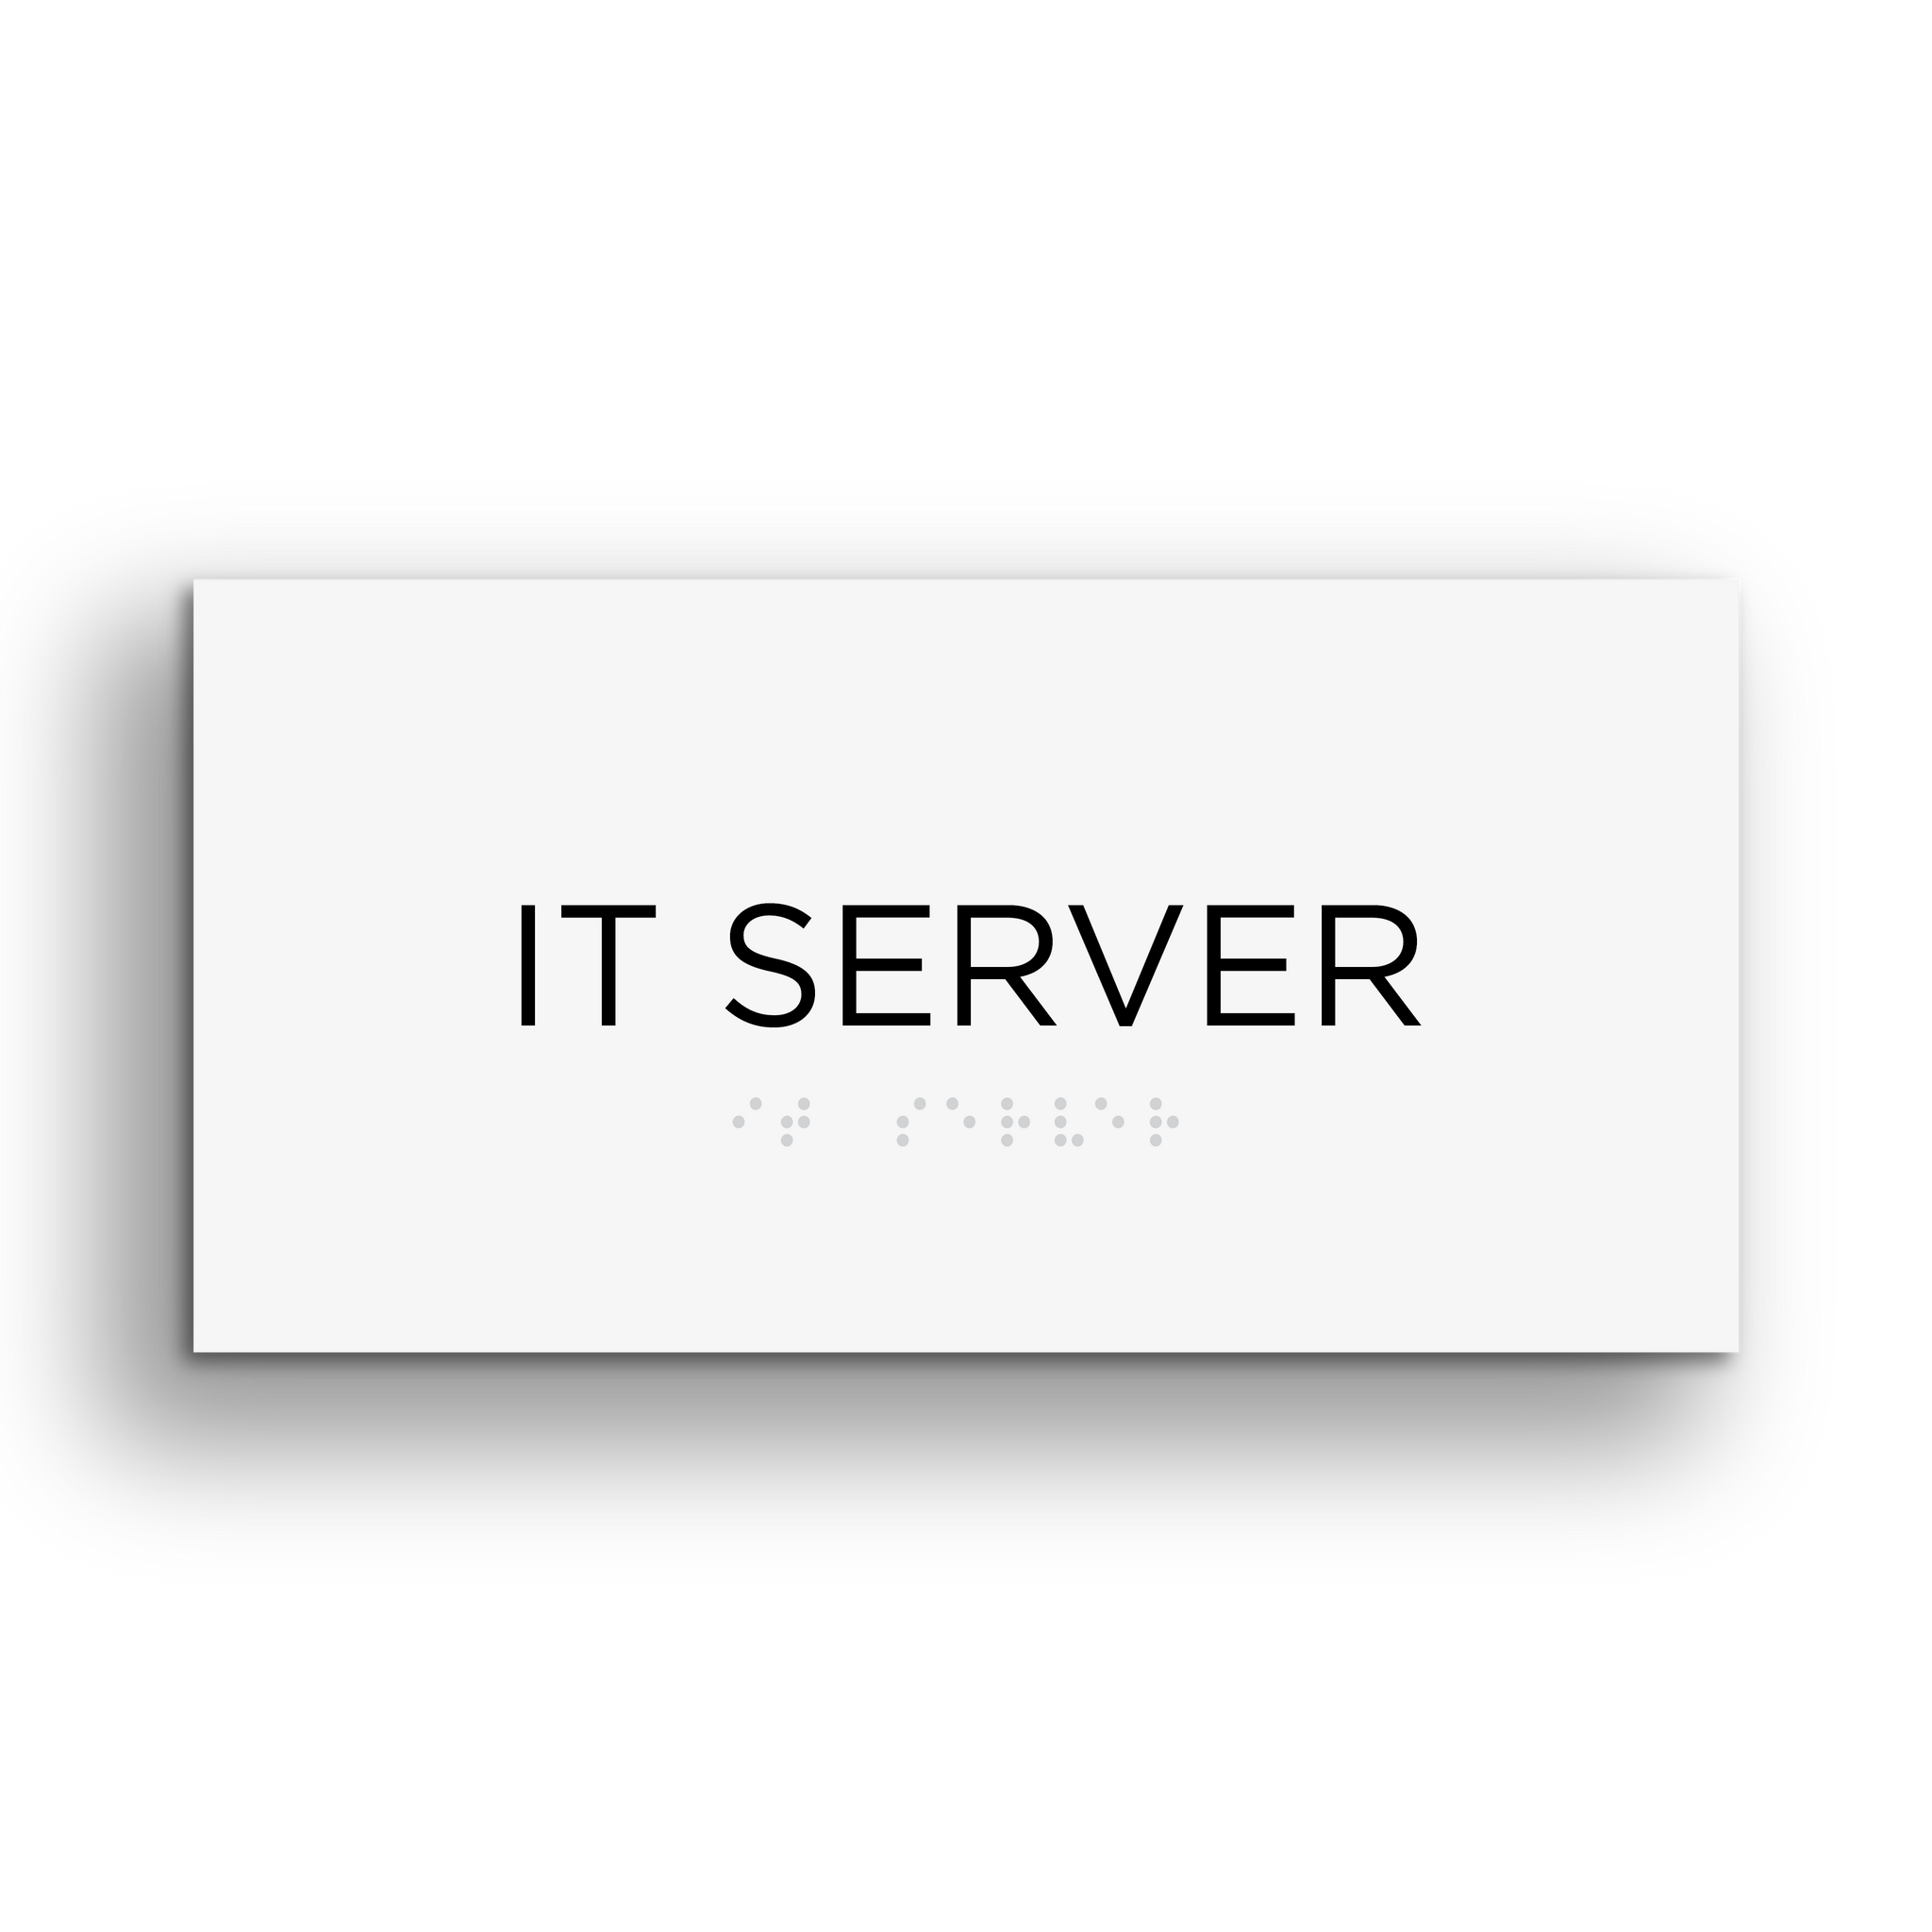 A Touch of Flair IT Server